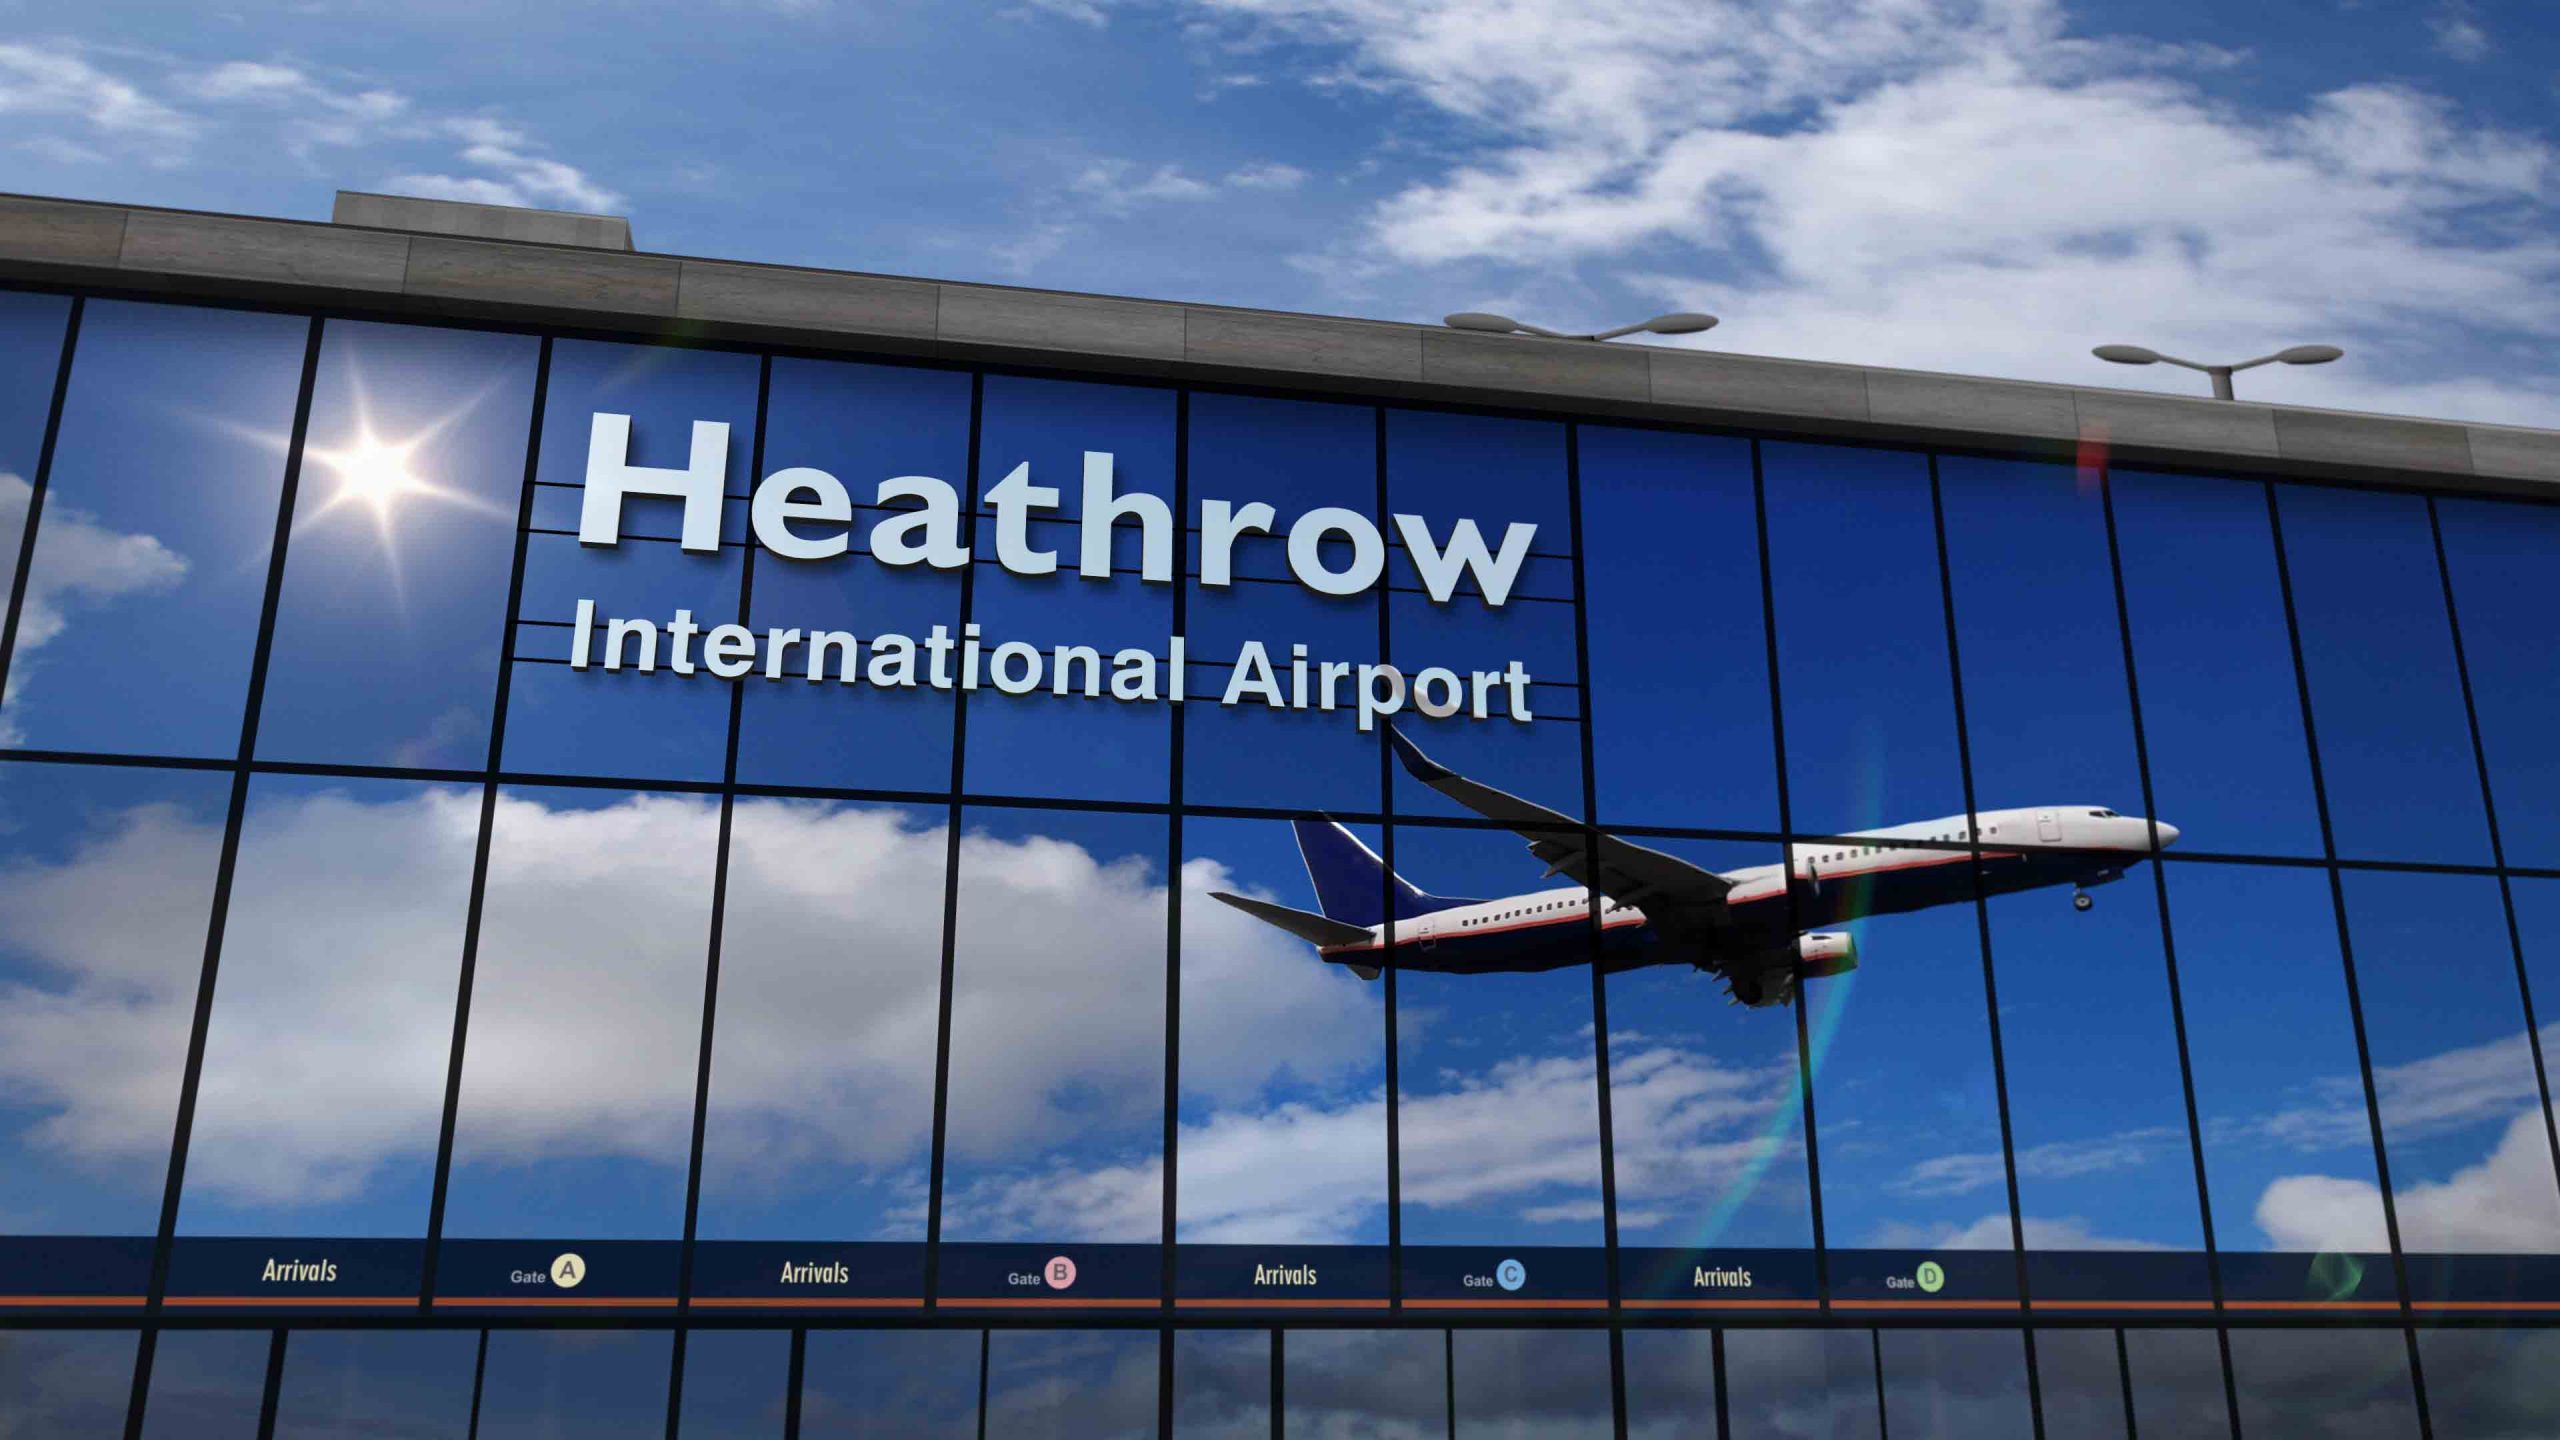 heathrow airport to london city airport